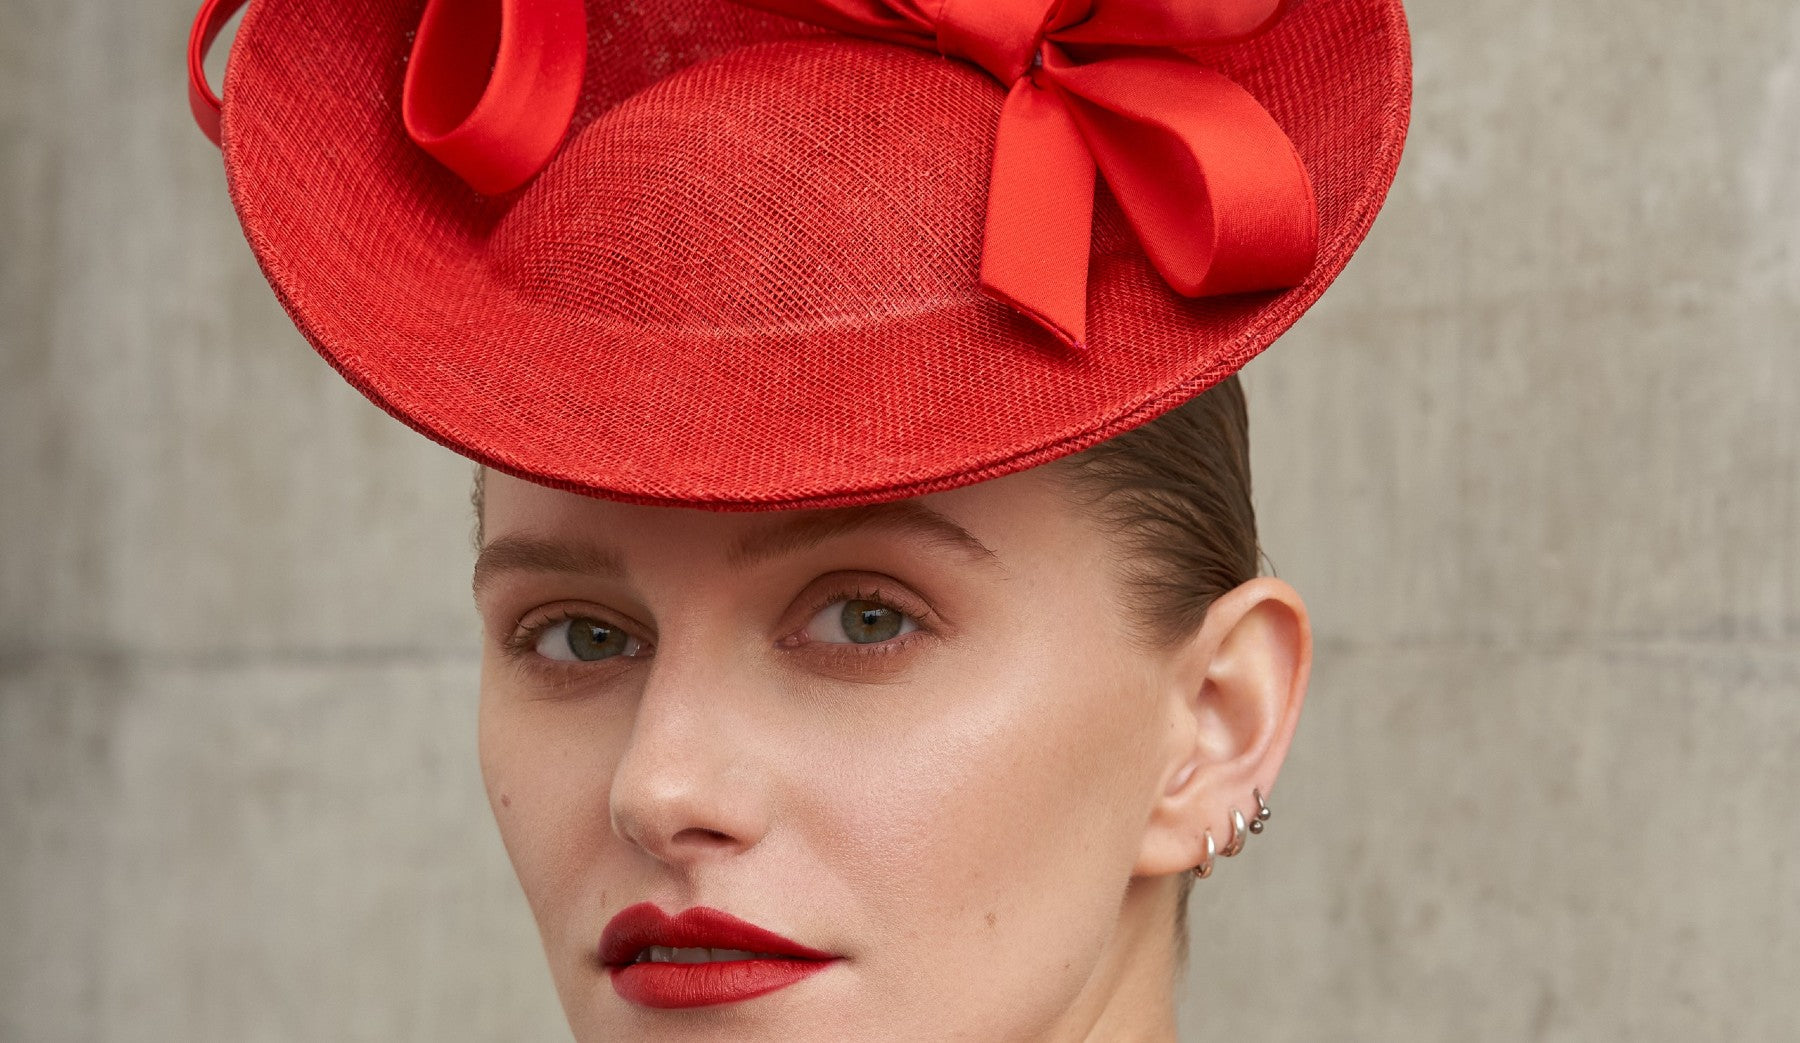 White woman wearing a red saucer hat with two bow on top